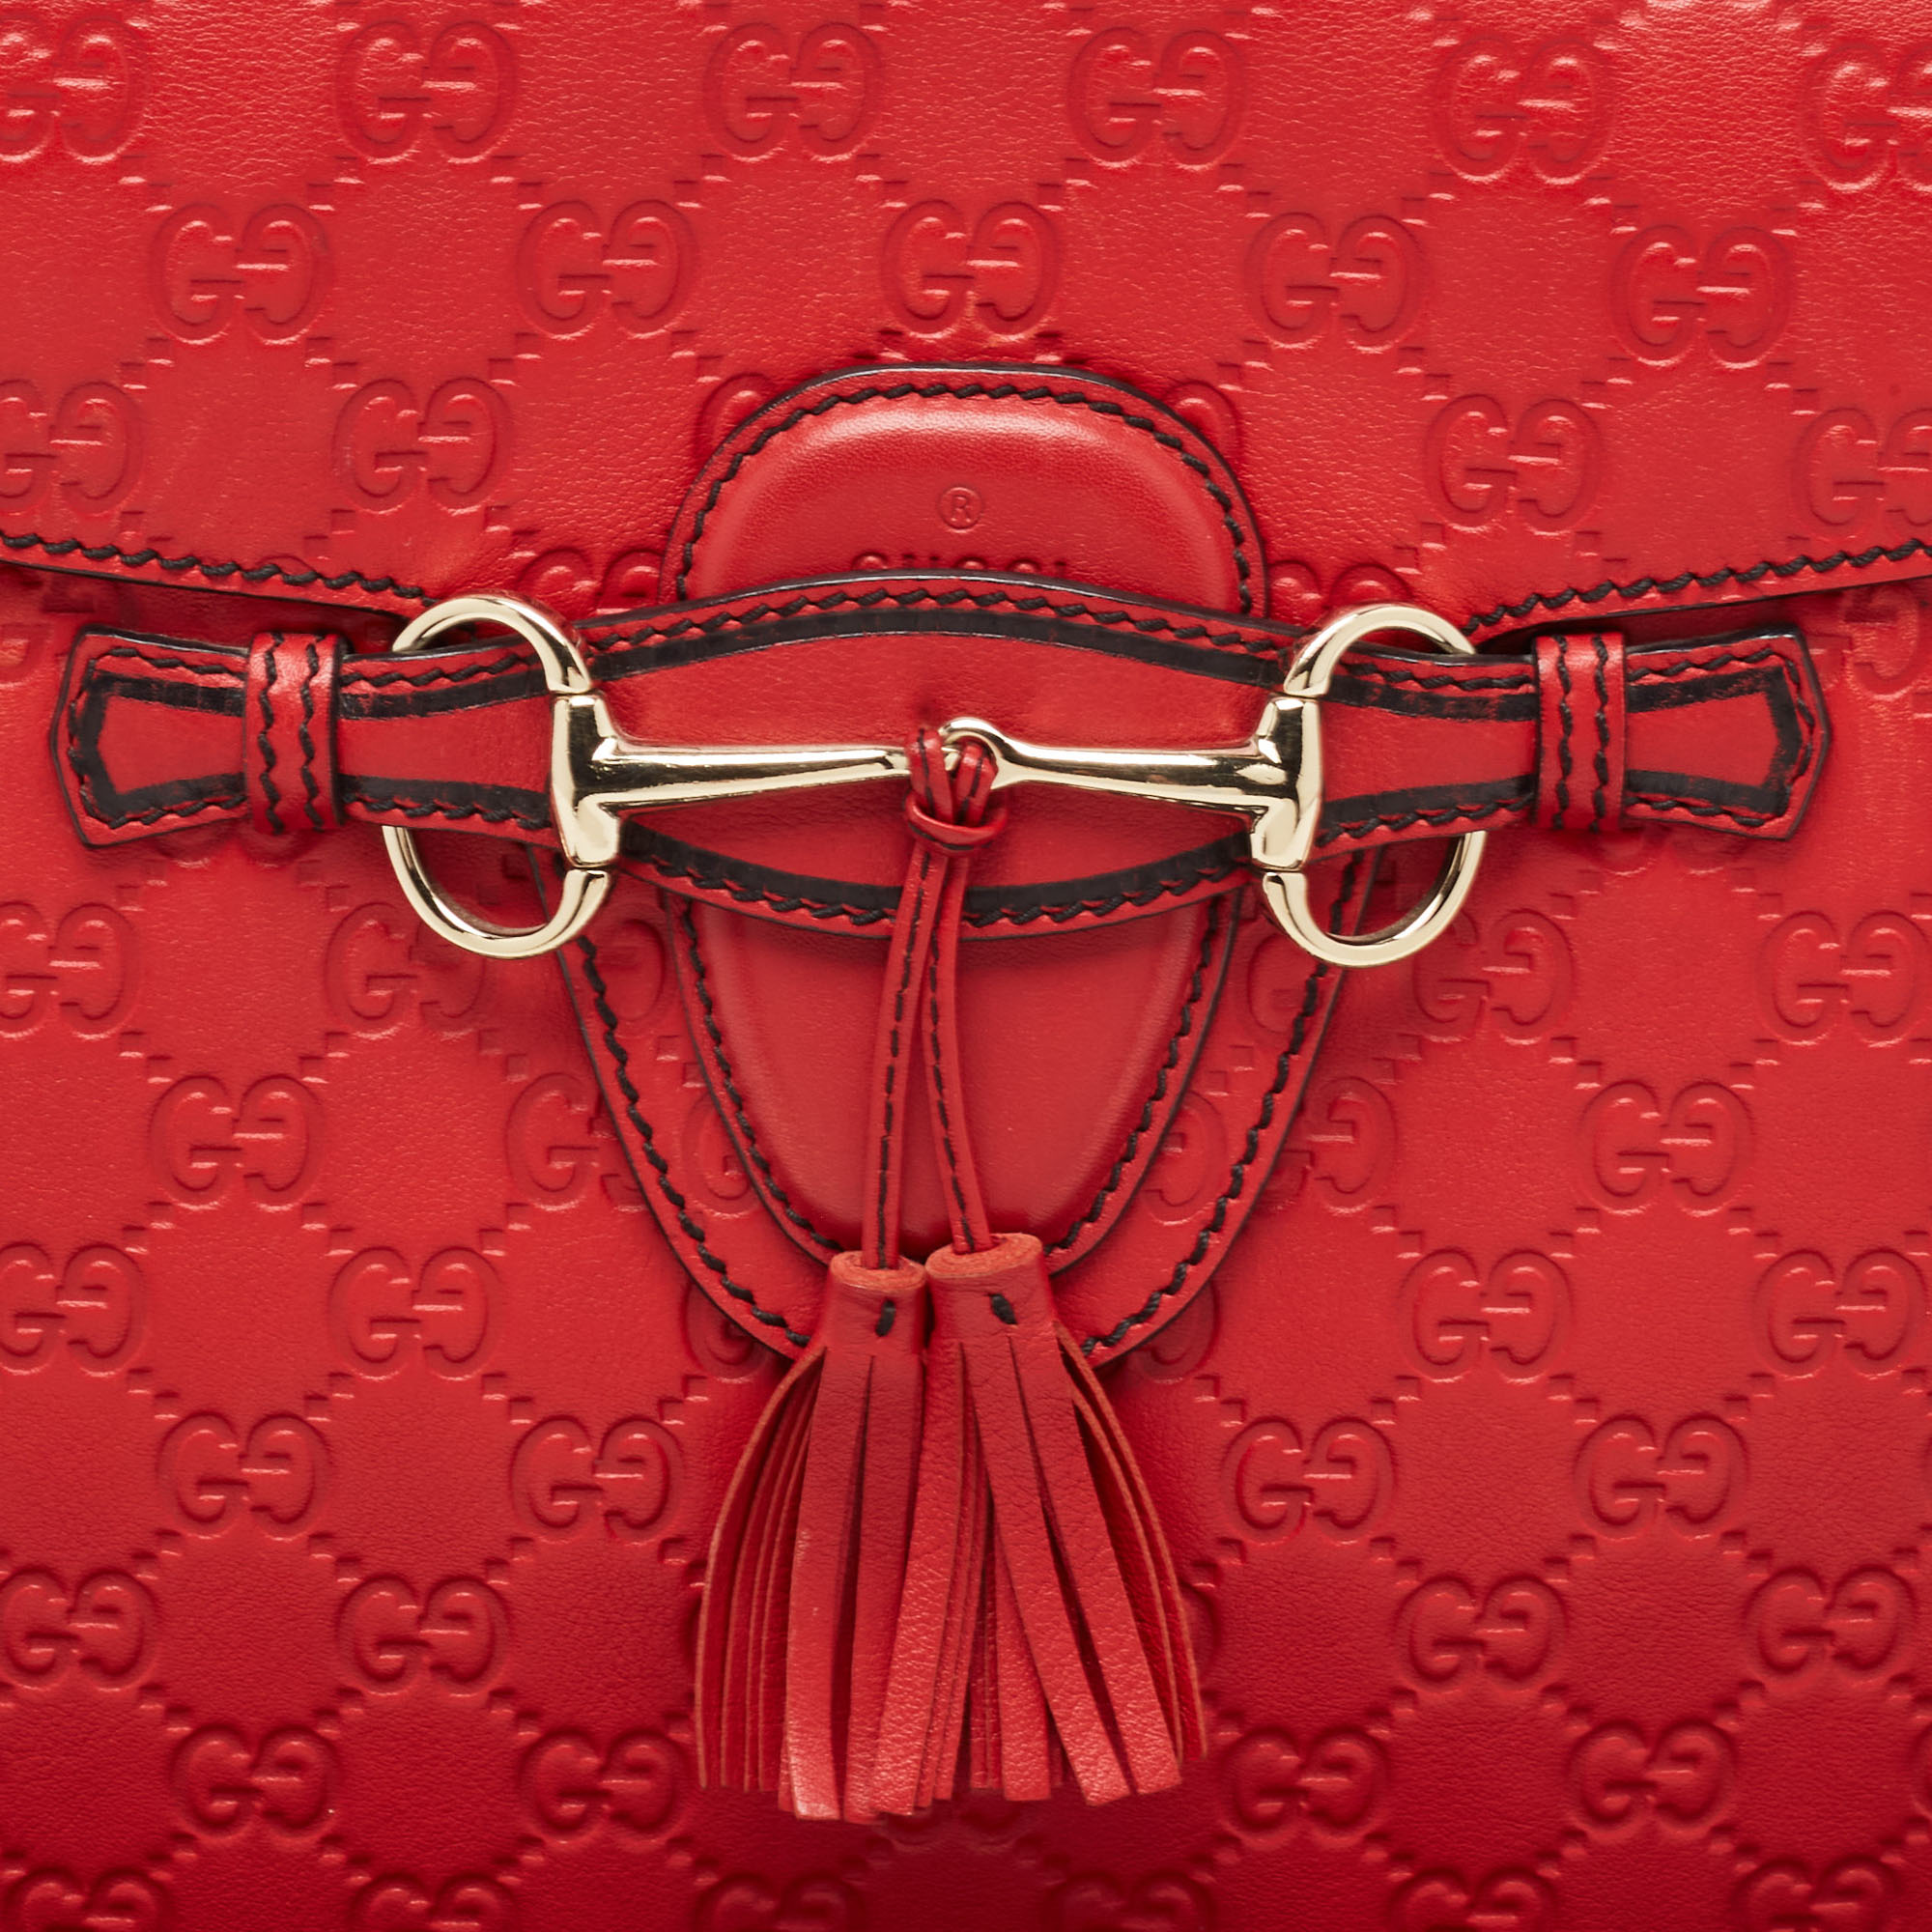 Gucci Red Guccissima Leather Emily Chain Shoulder Bag